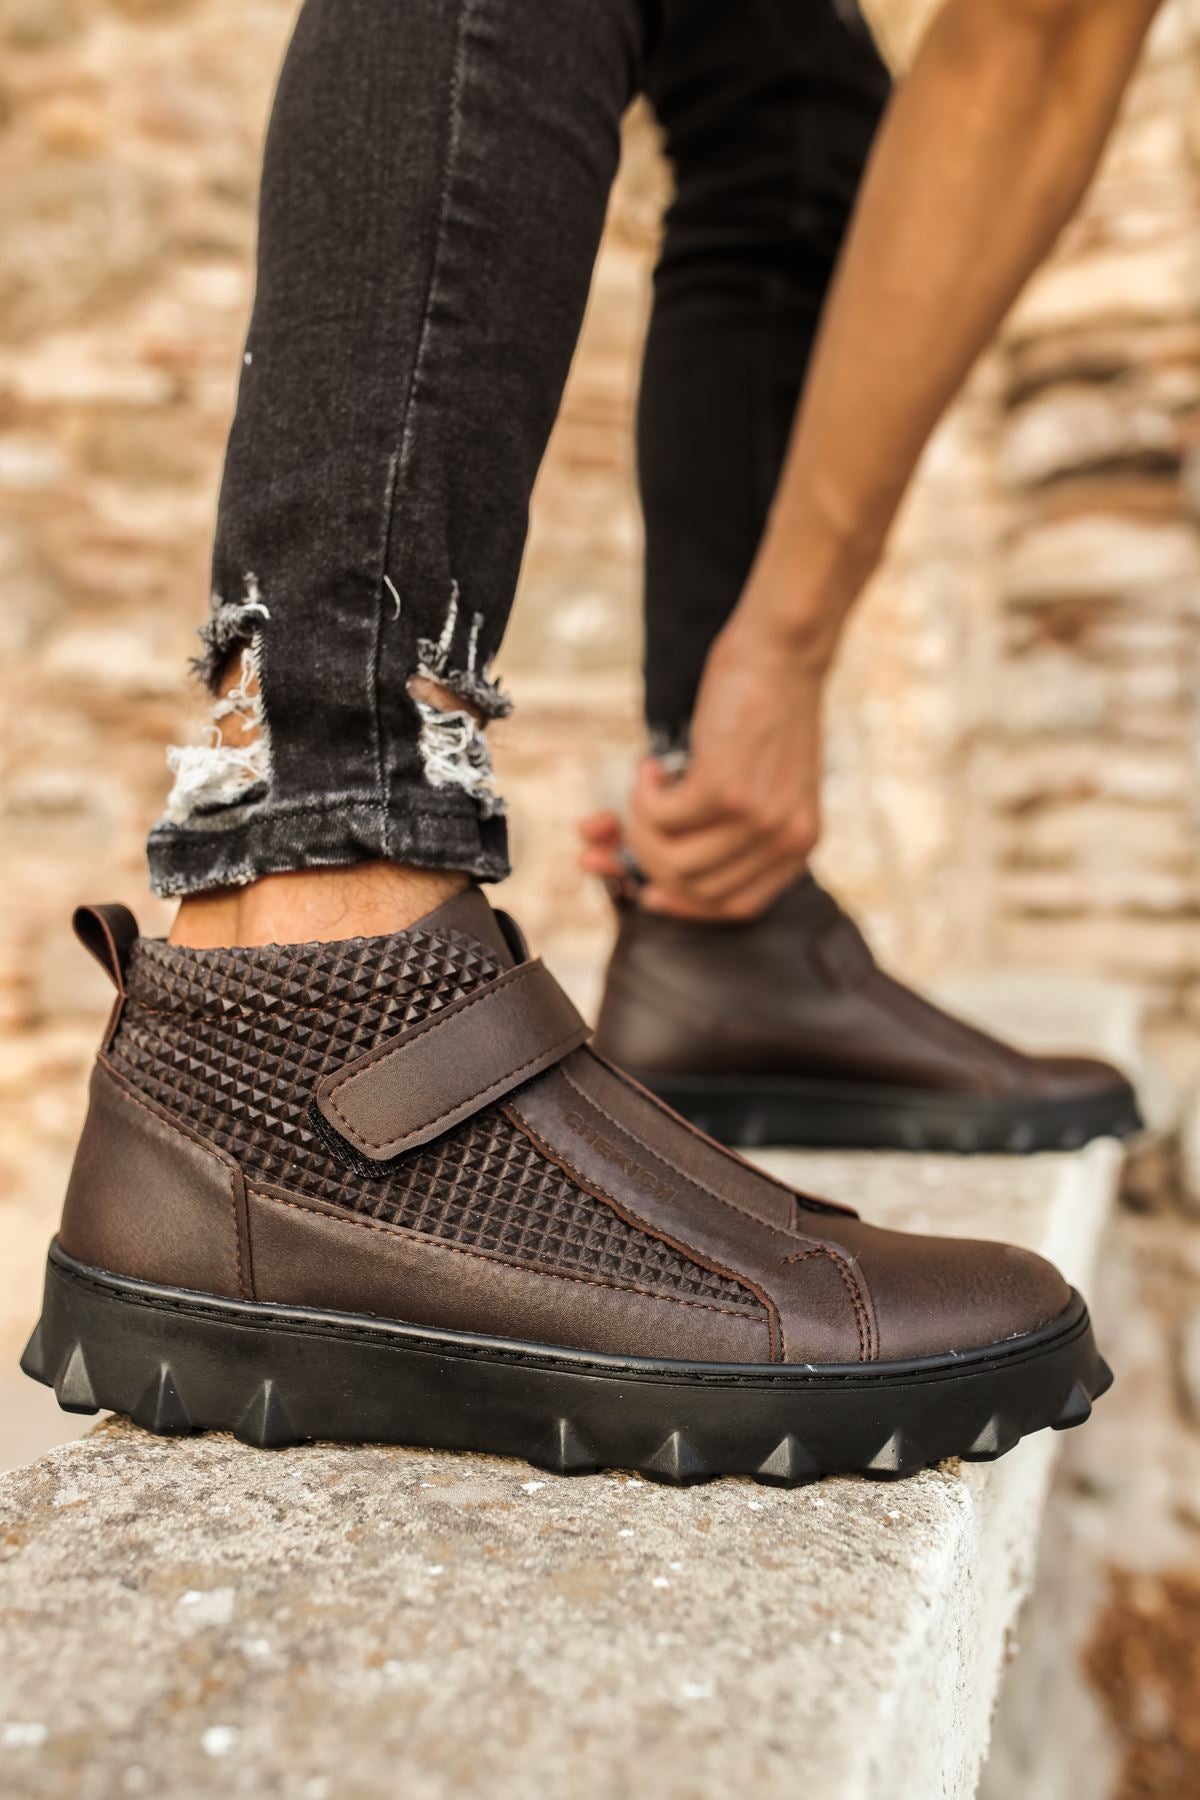 CH103 ST Men's Sneaker Boots BROWN - STREETMODE ™